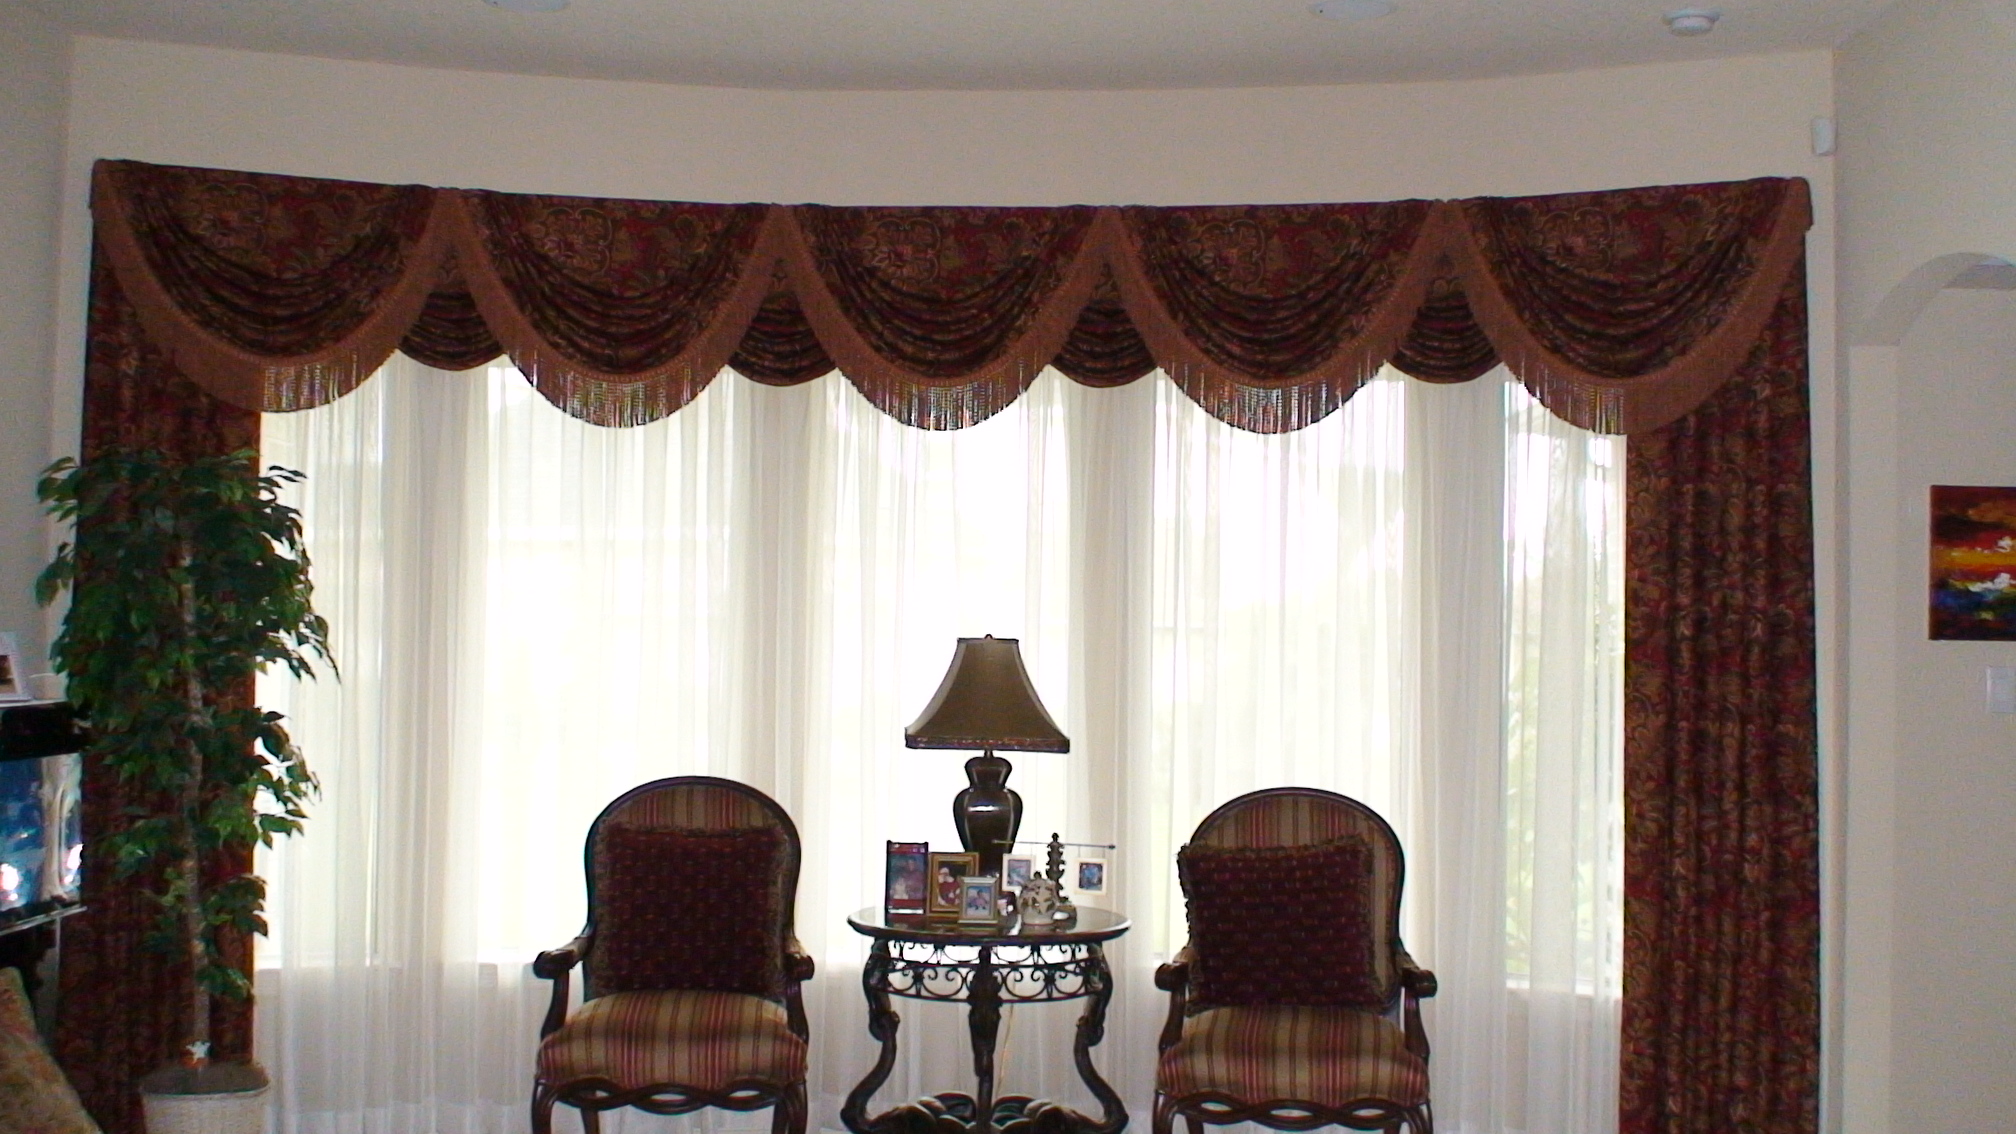 professional custom made draperies dress your window beautifully. it brings  the color, PQOCBNQ